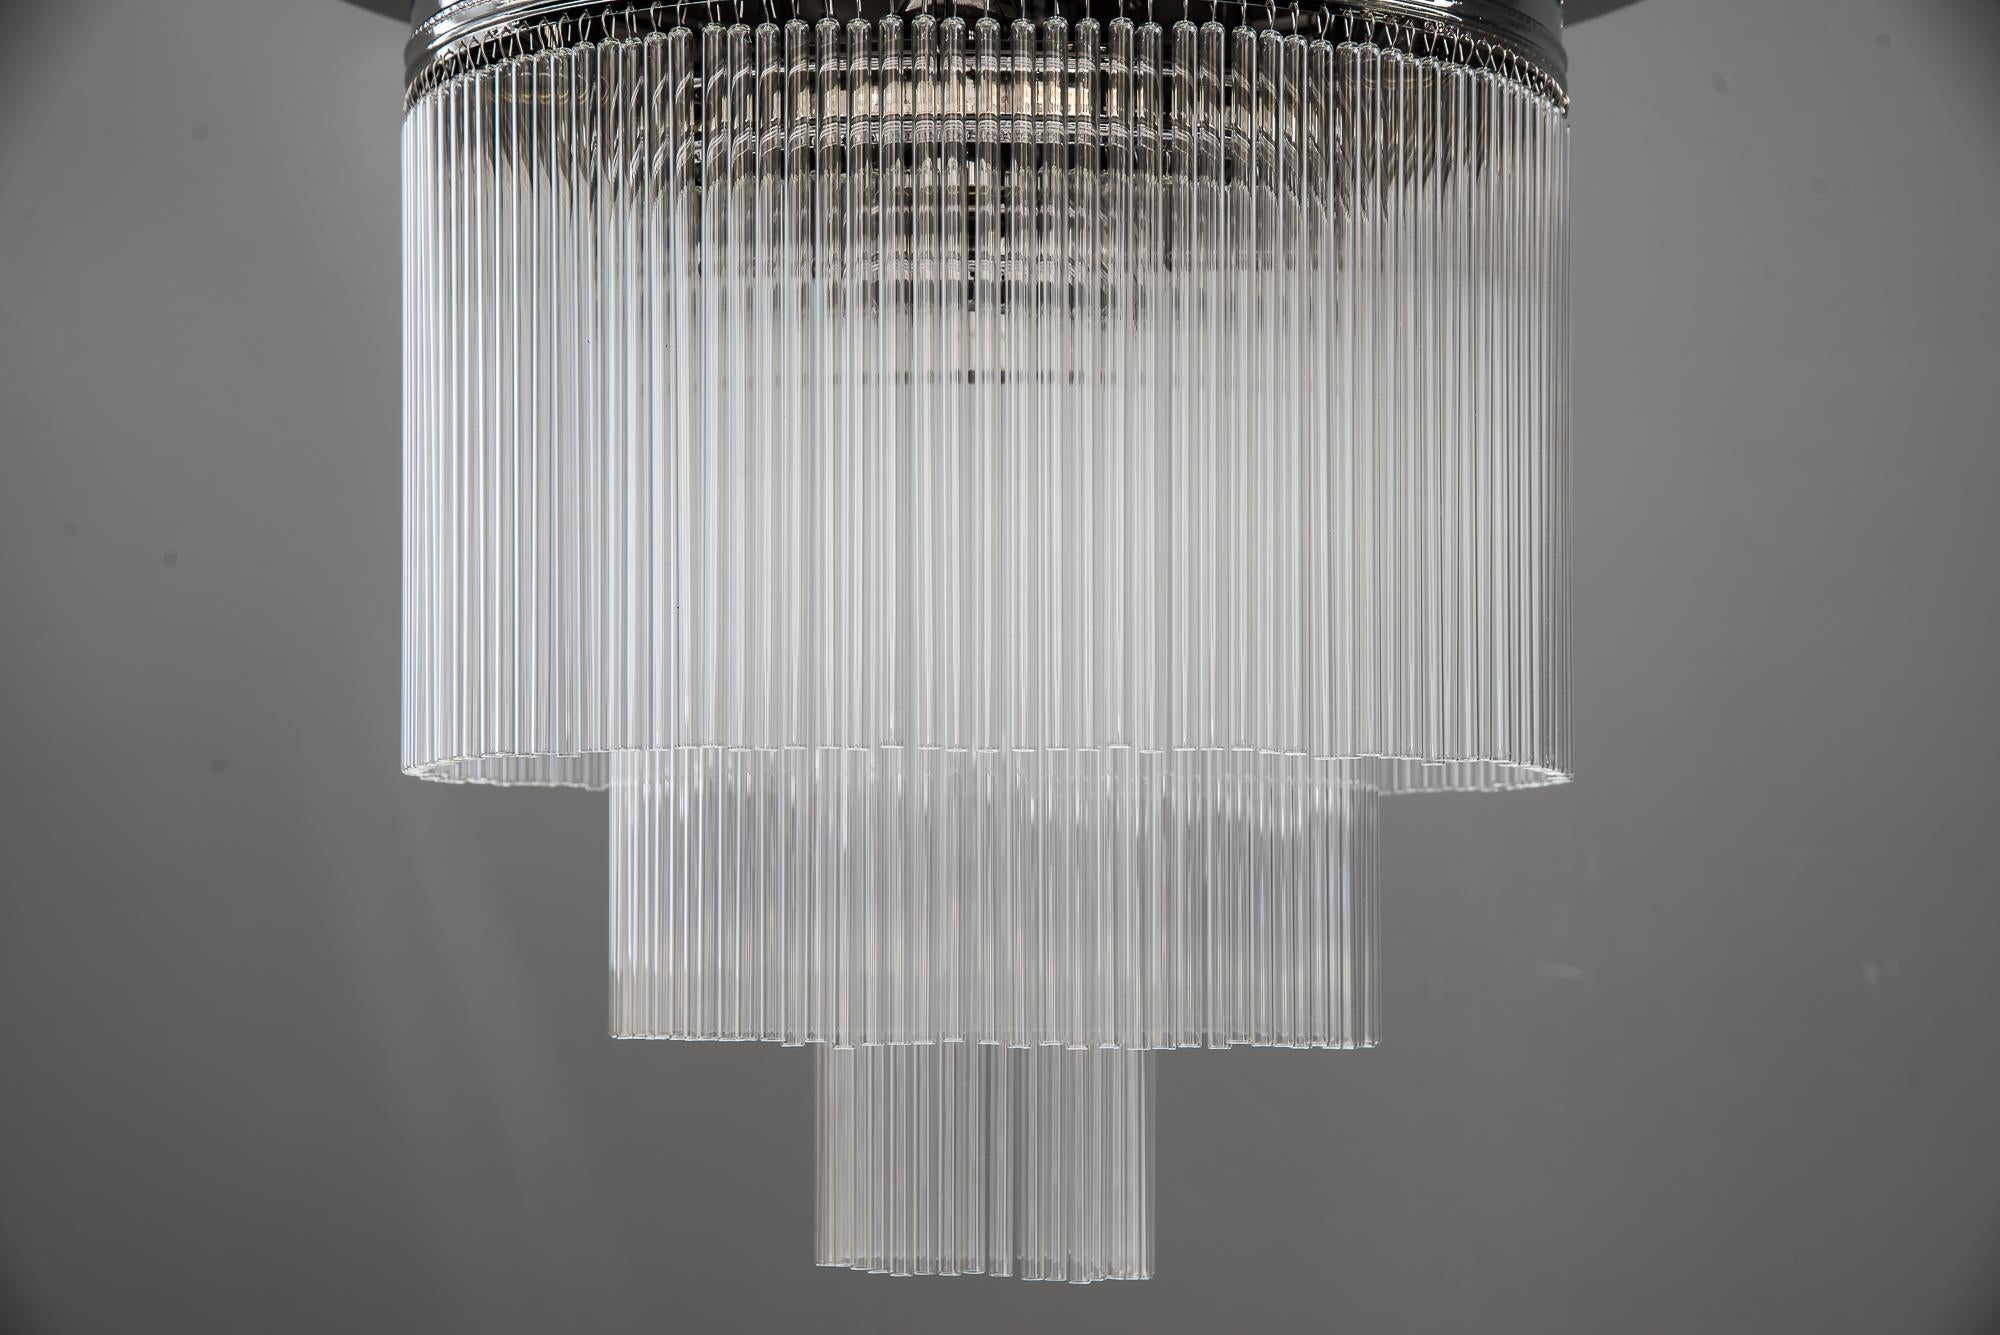 Austrian Art Deco Nickel-Plated Ceiling Lamp with Glass Sticks, circa 1920s